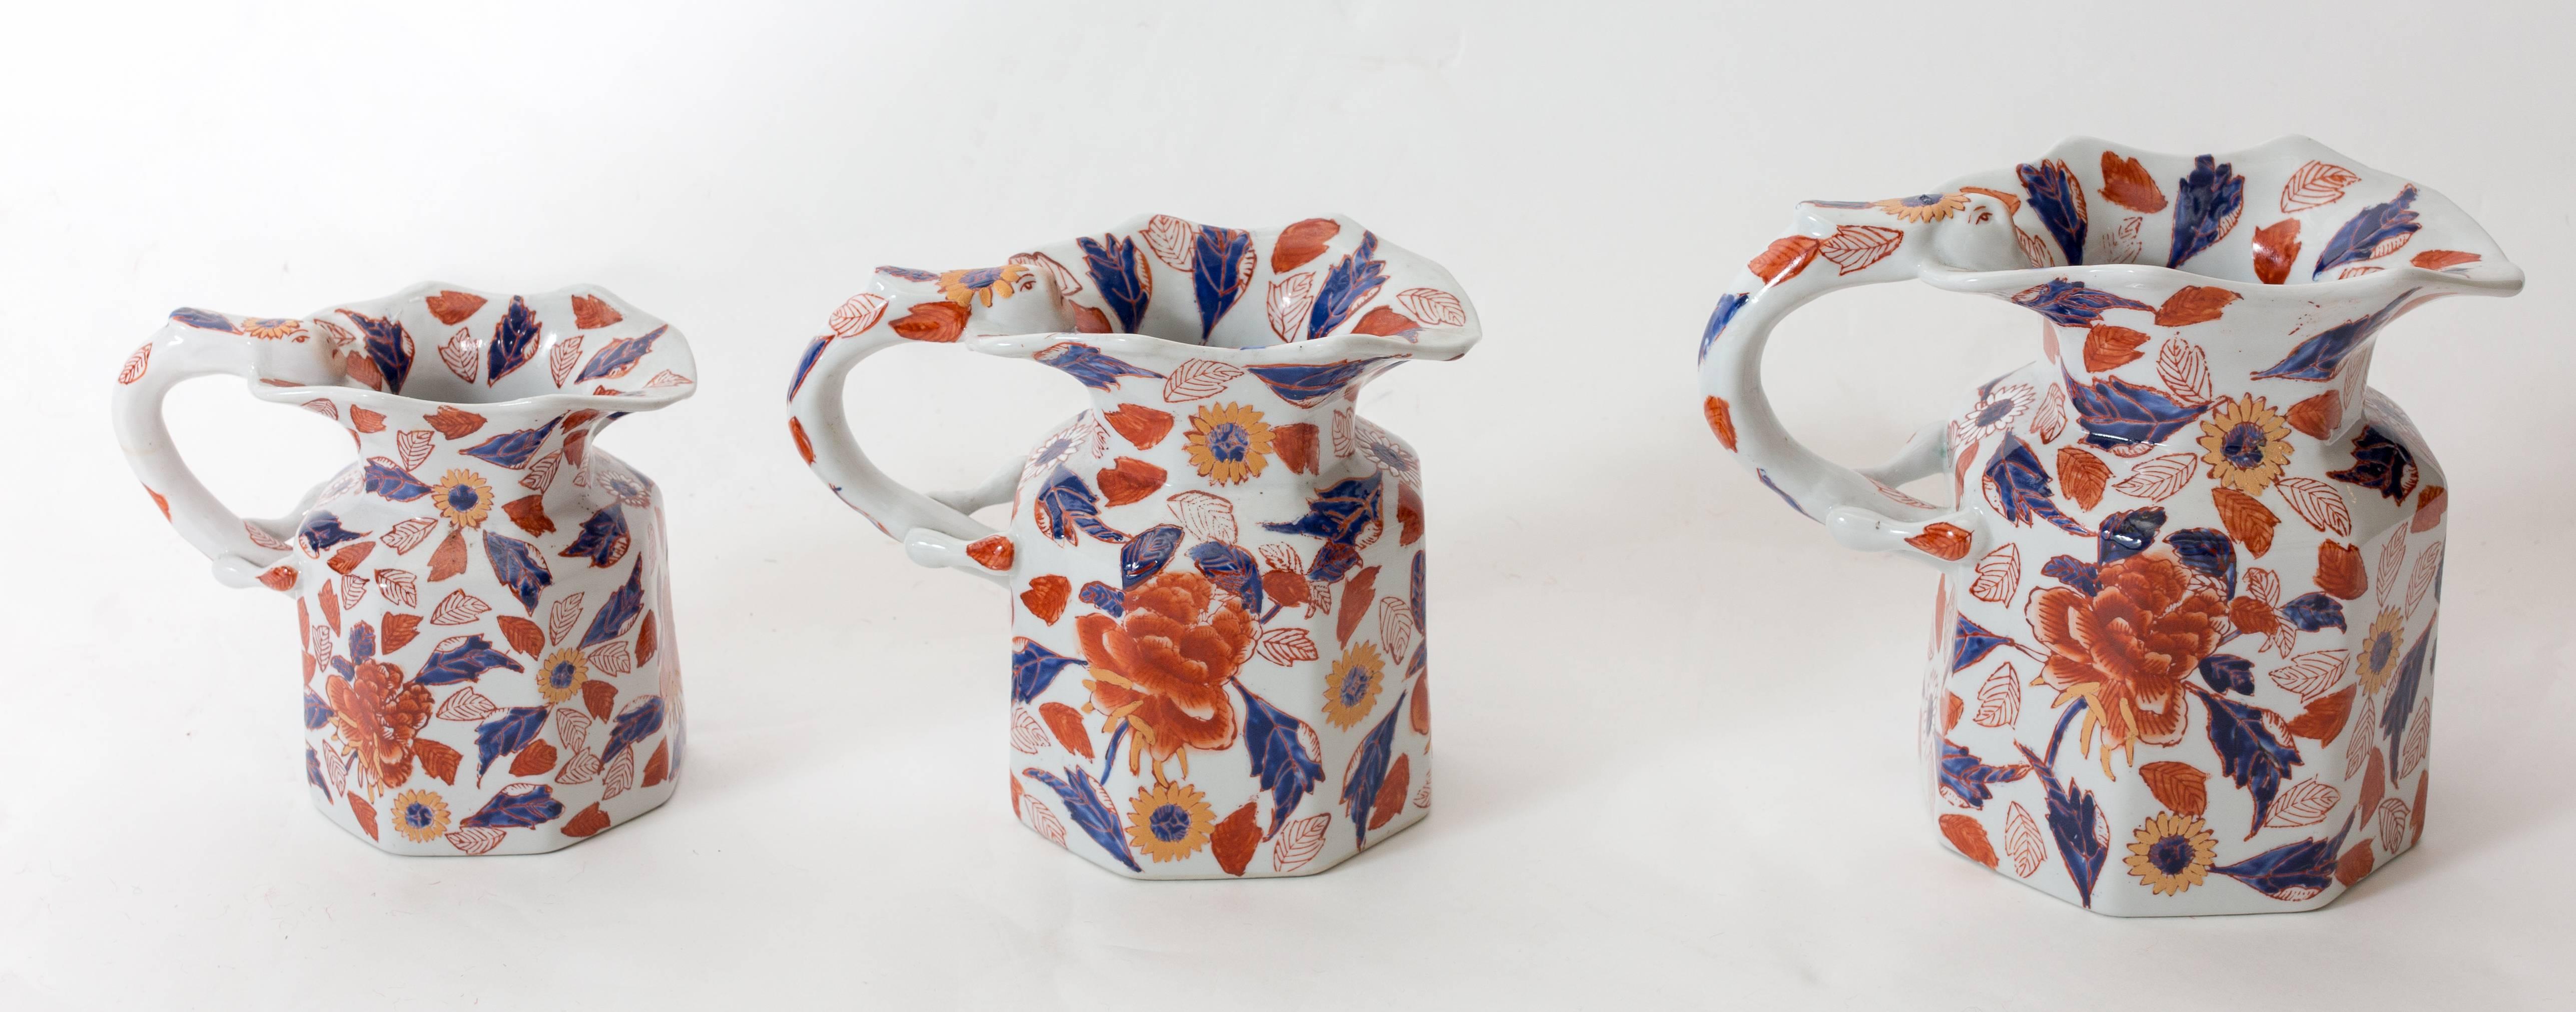 Beautiful trio of pulled handle, handmade, hand thrown porcelain pitchers each with a face motif atop the handle with hand-painted floral glaze of purple, orange and gold.